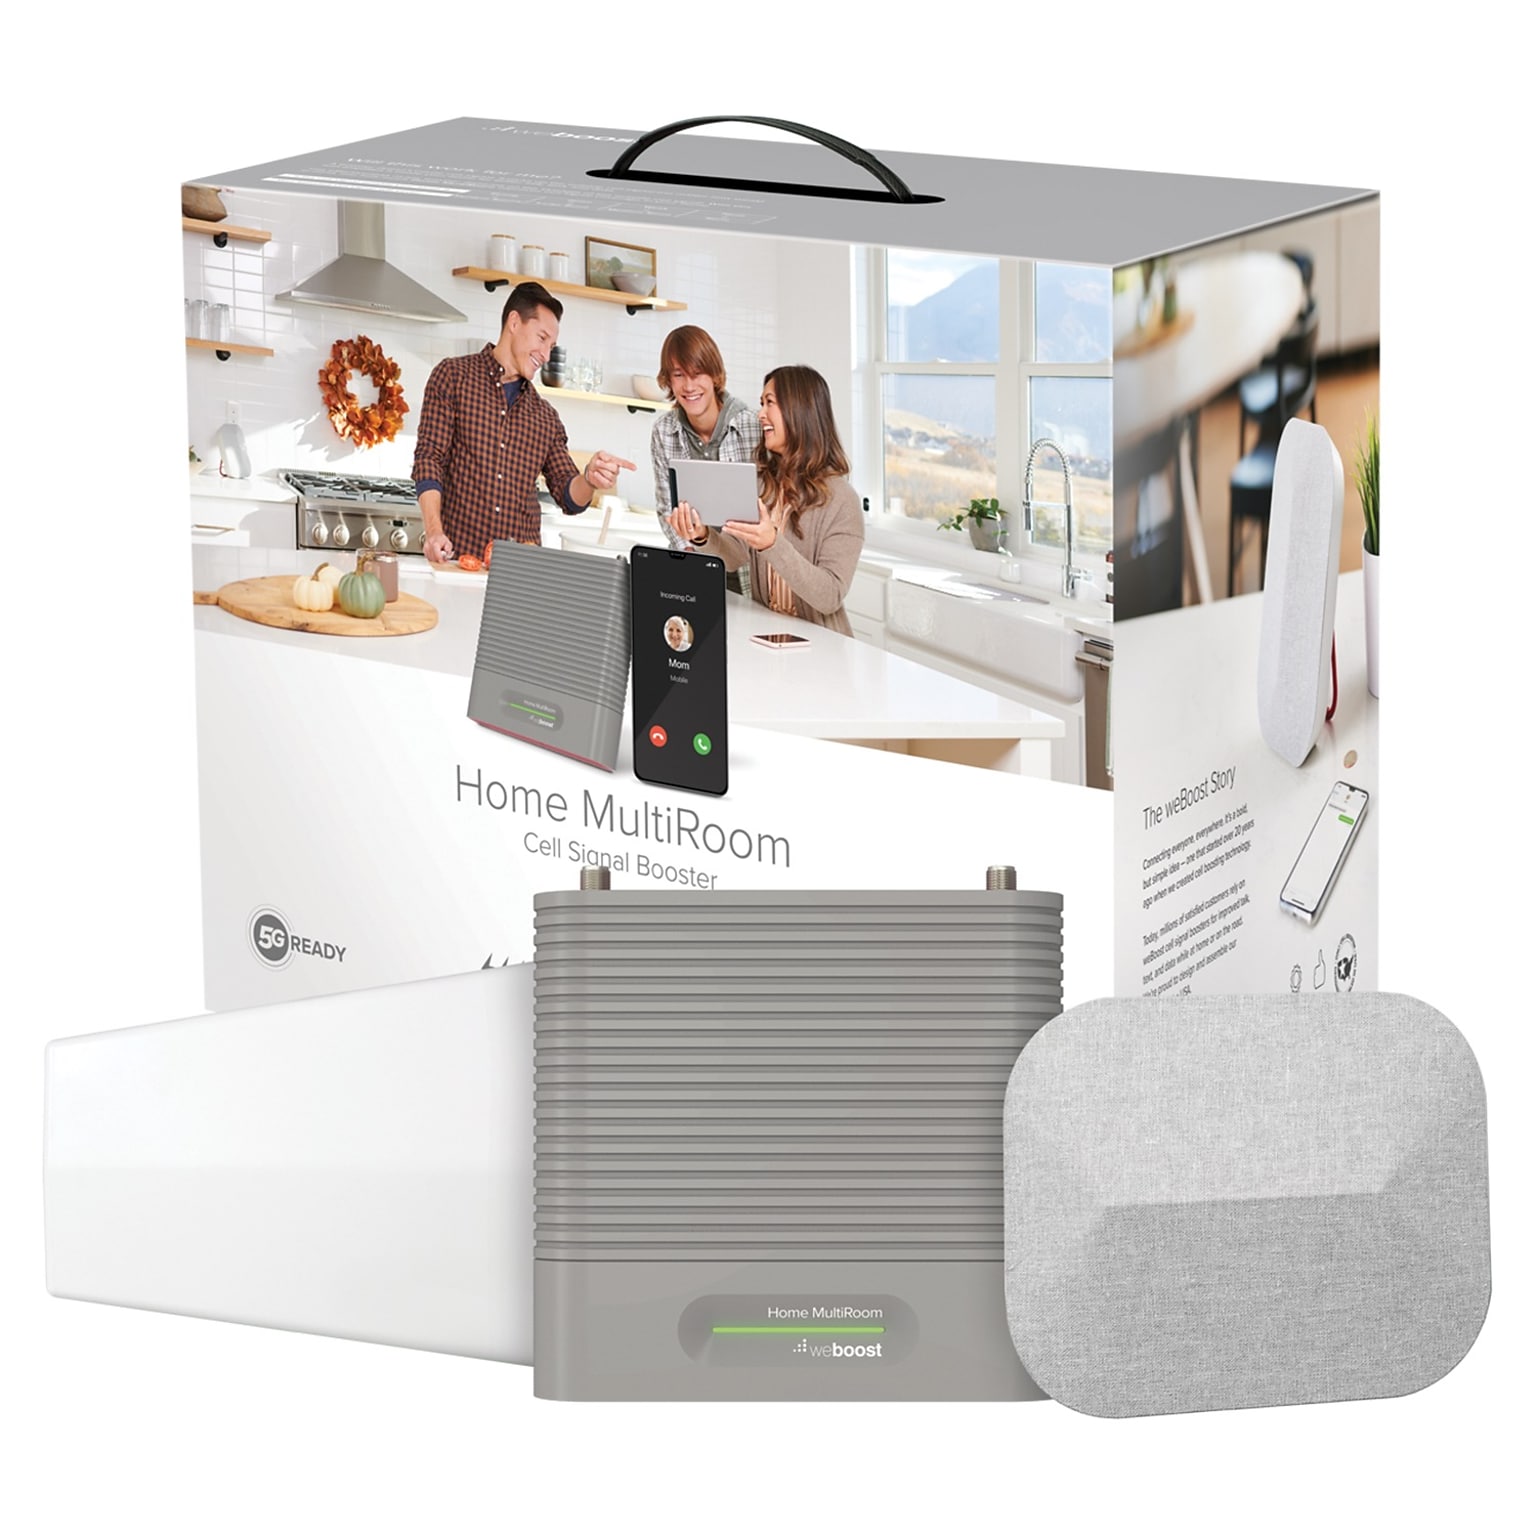 weBoost Home Multi-Room Cell Signal Booster Kit (470144)